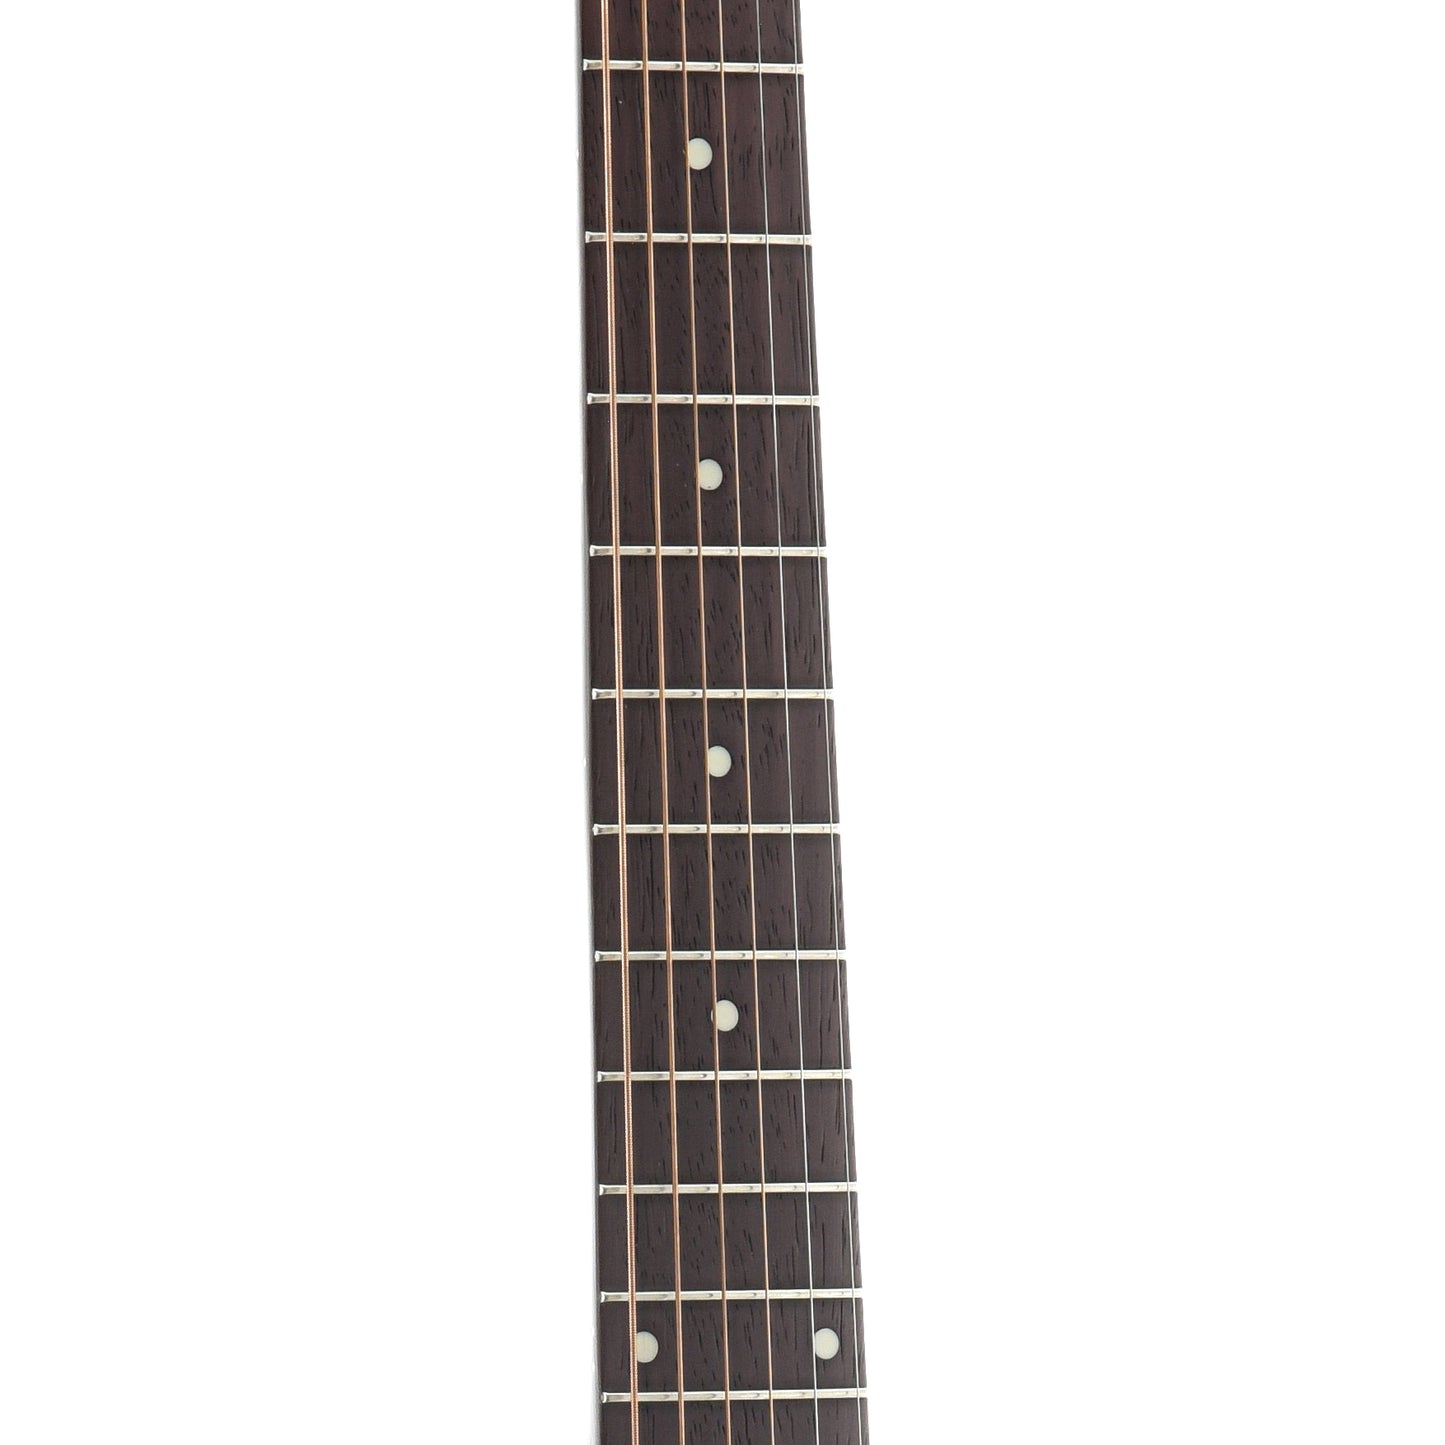 Fretboard of Recording King Series 11 All Solid 000 Acoustic Guitar